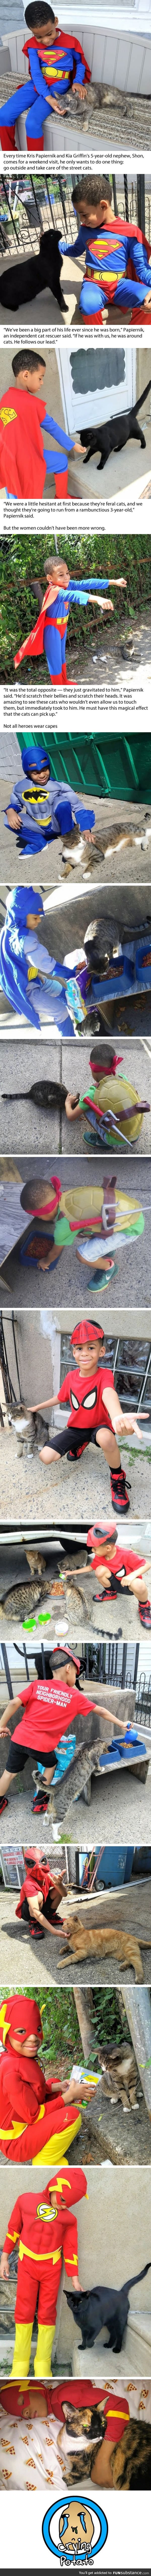 5-year-old boy who saves street cats is the hero we all want